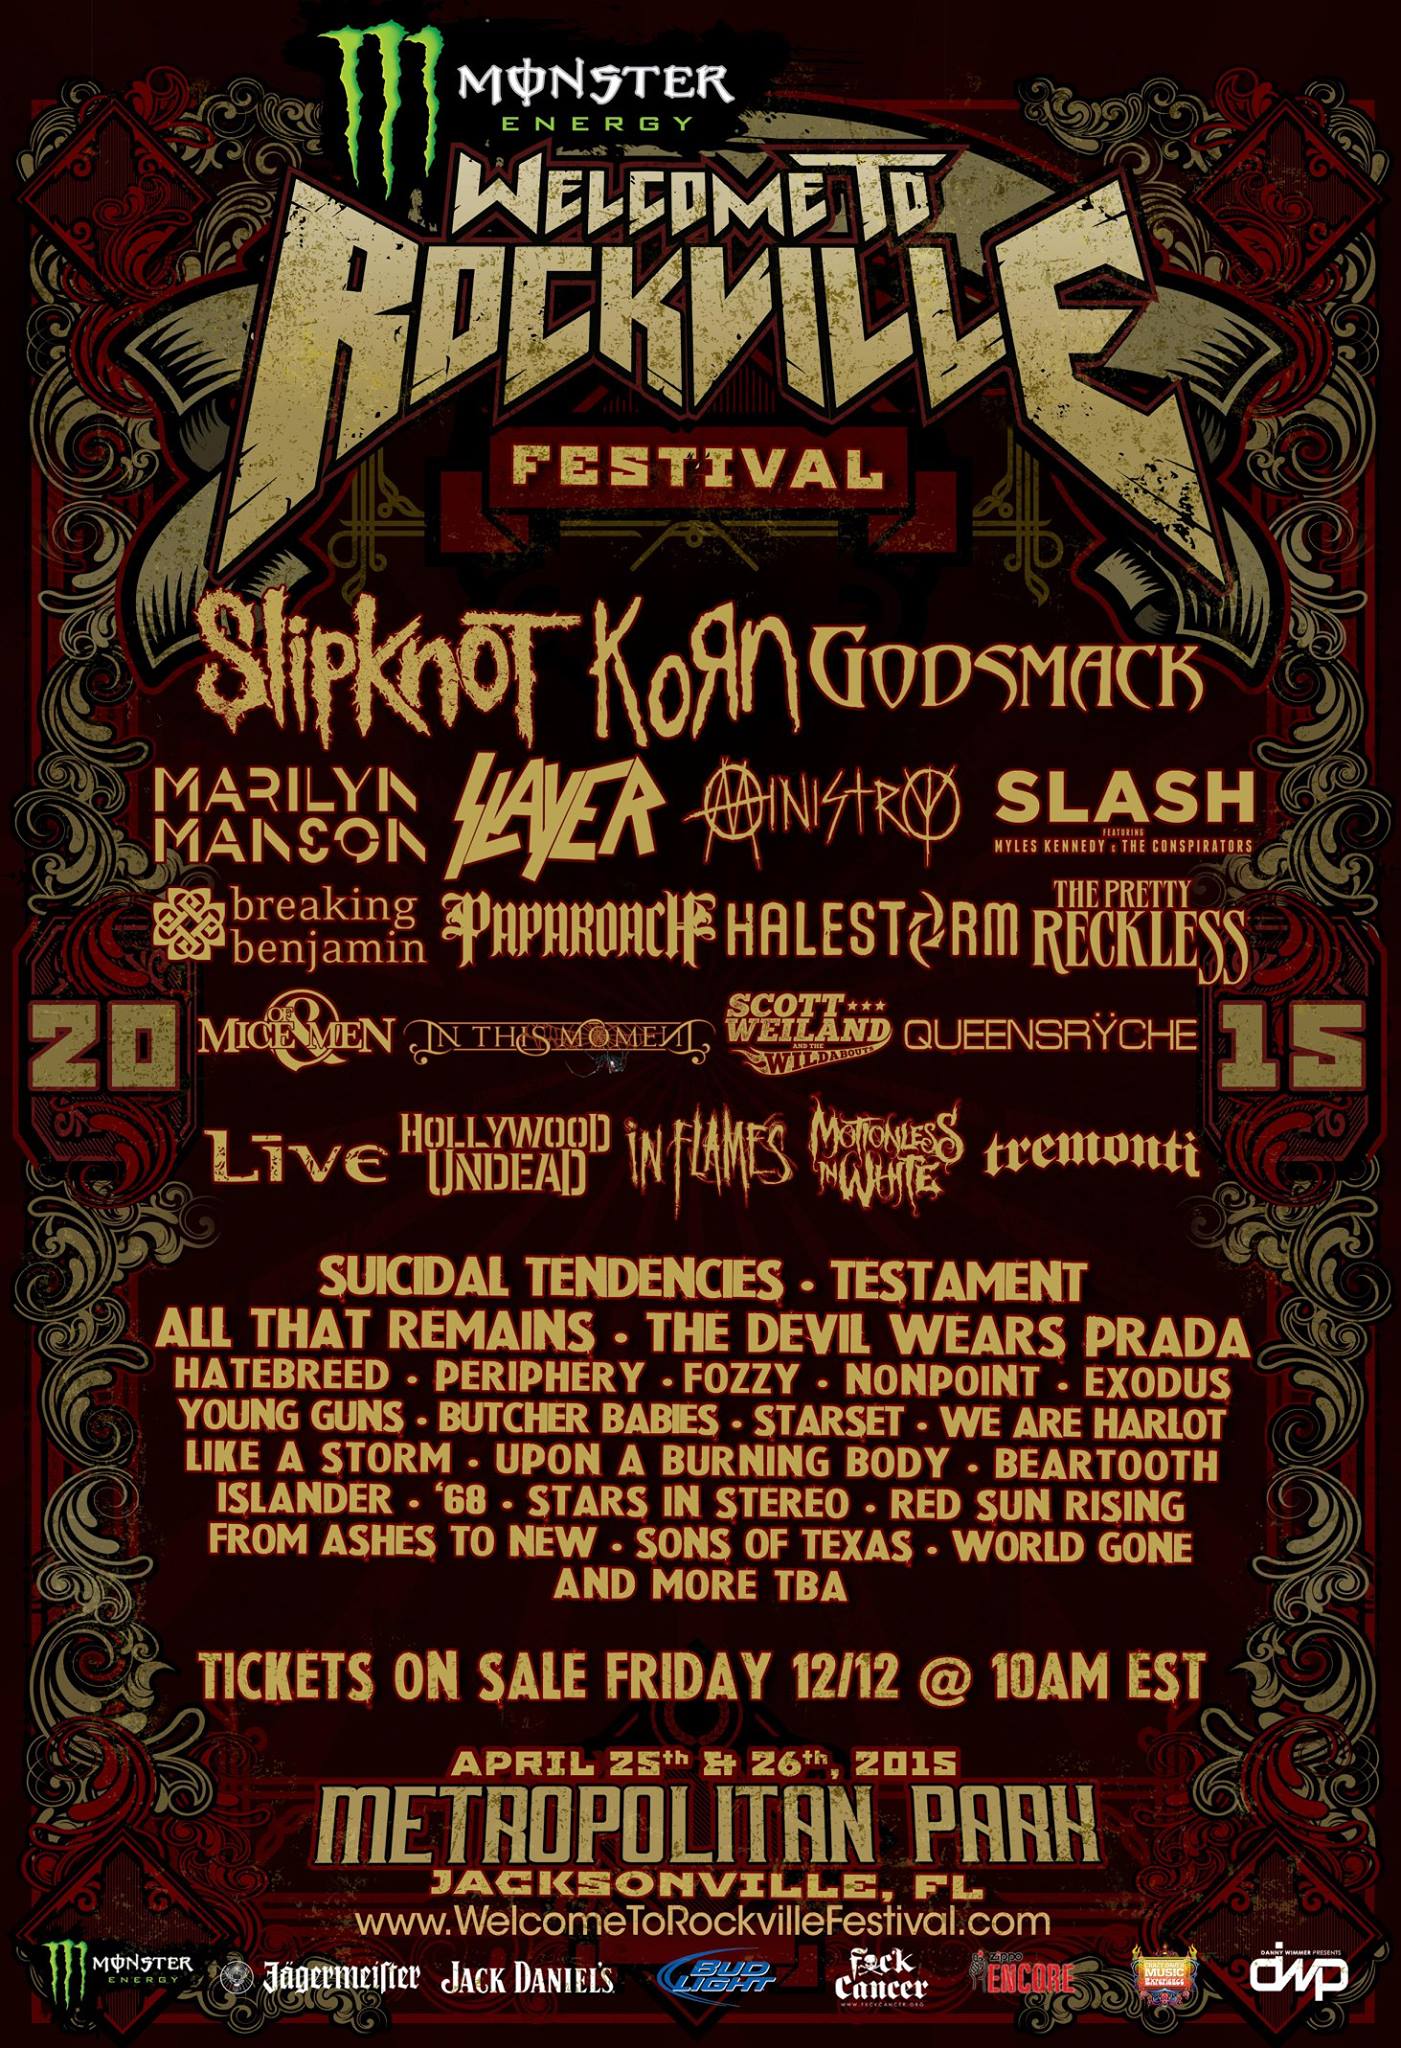 WELCOME TO ROCKVILLE 2015 LINEUP ANNOUNCED – SLIPKNOT, KORN, GODSMACK, and MORE